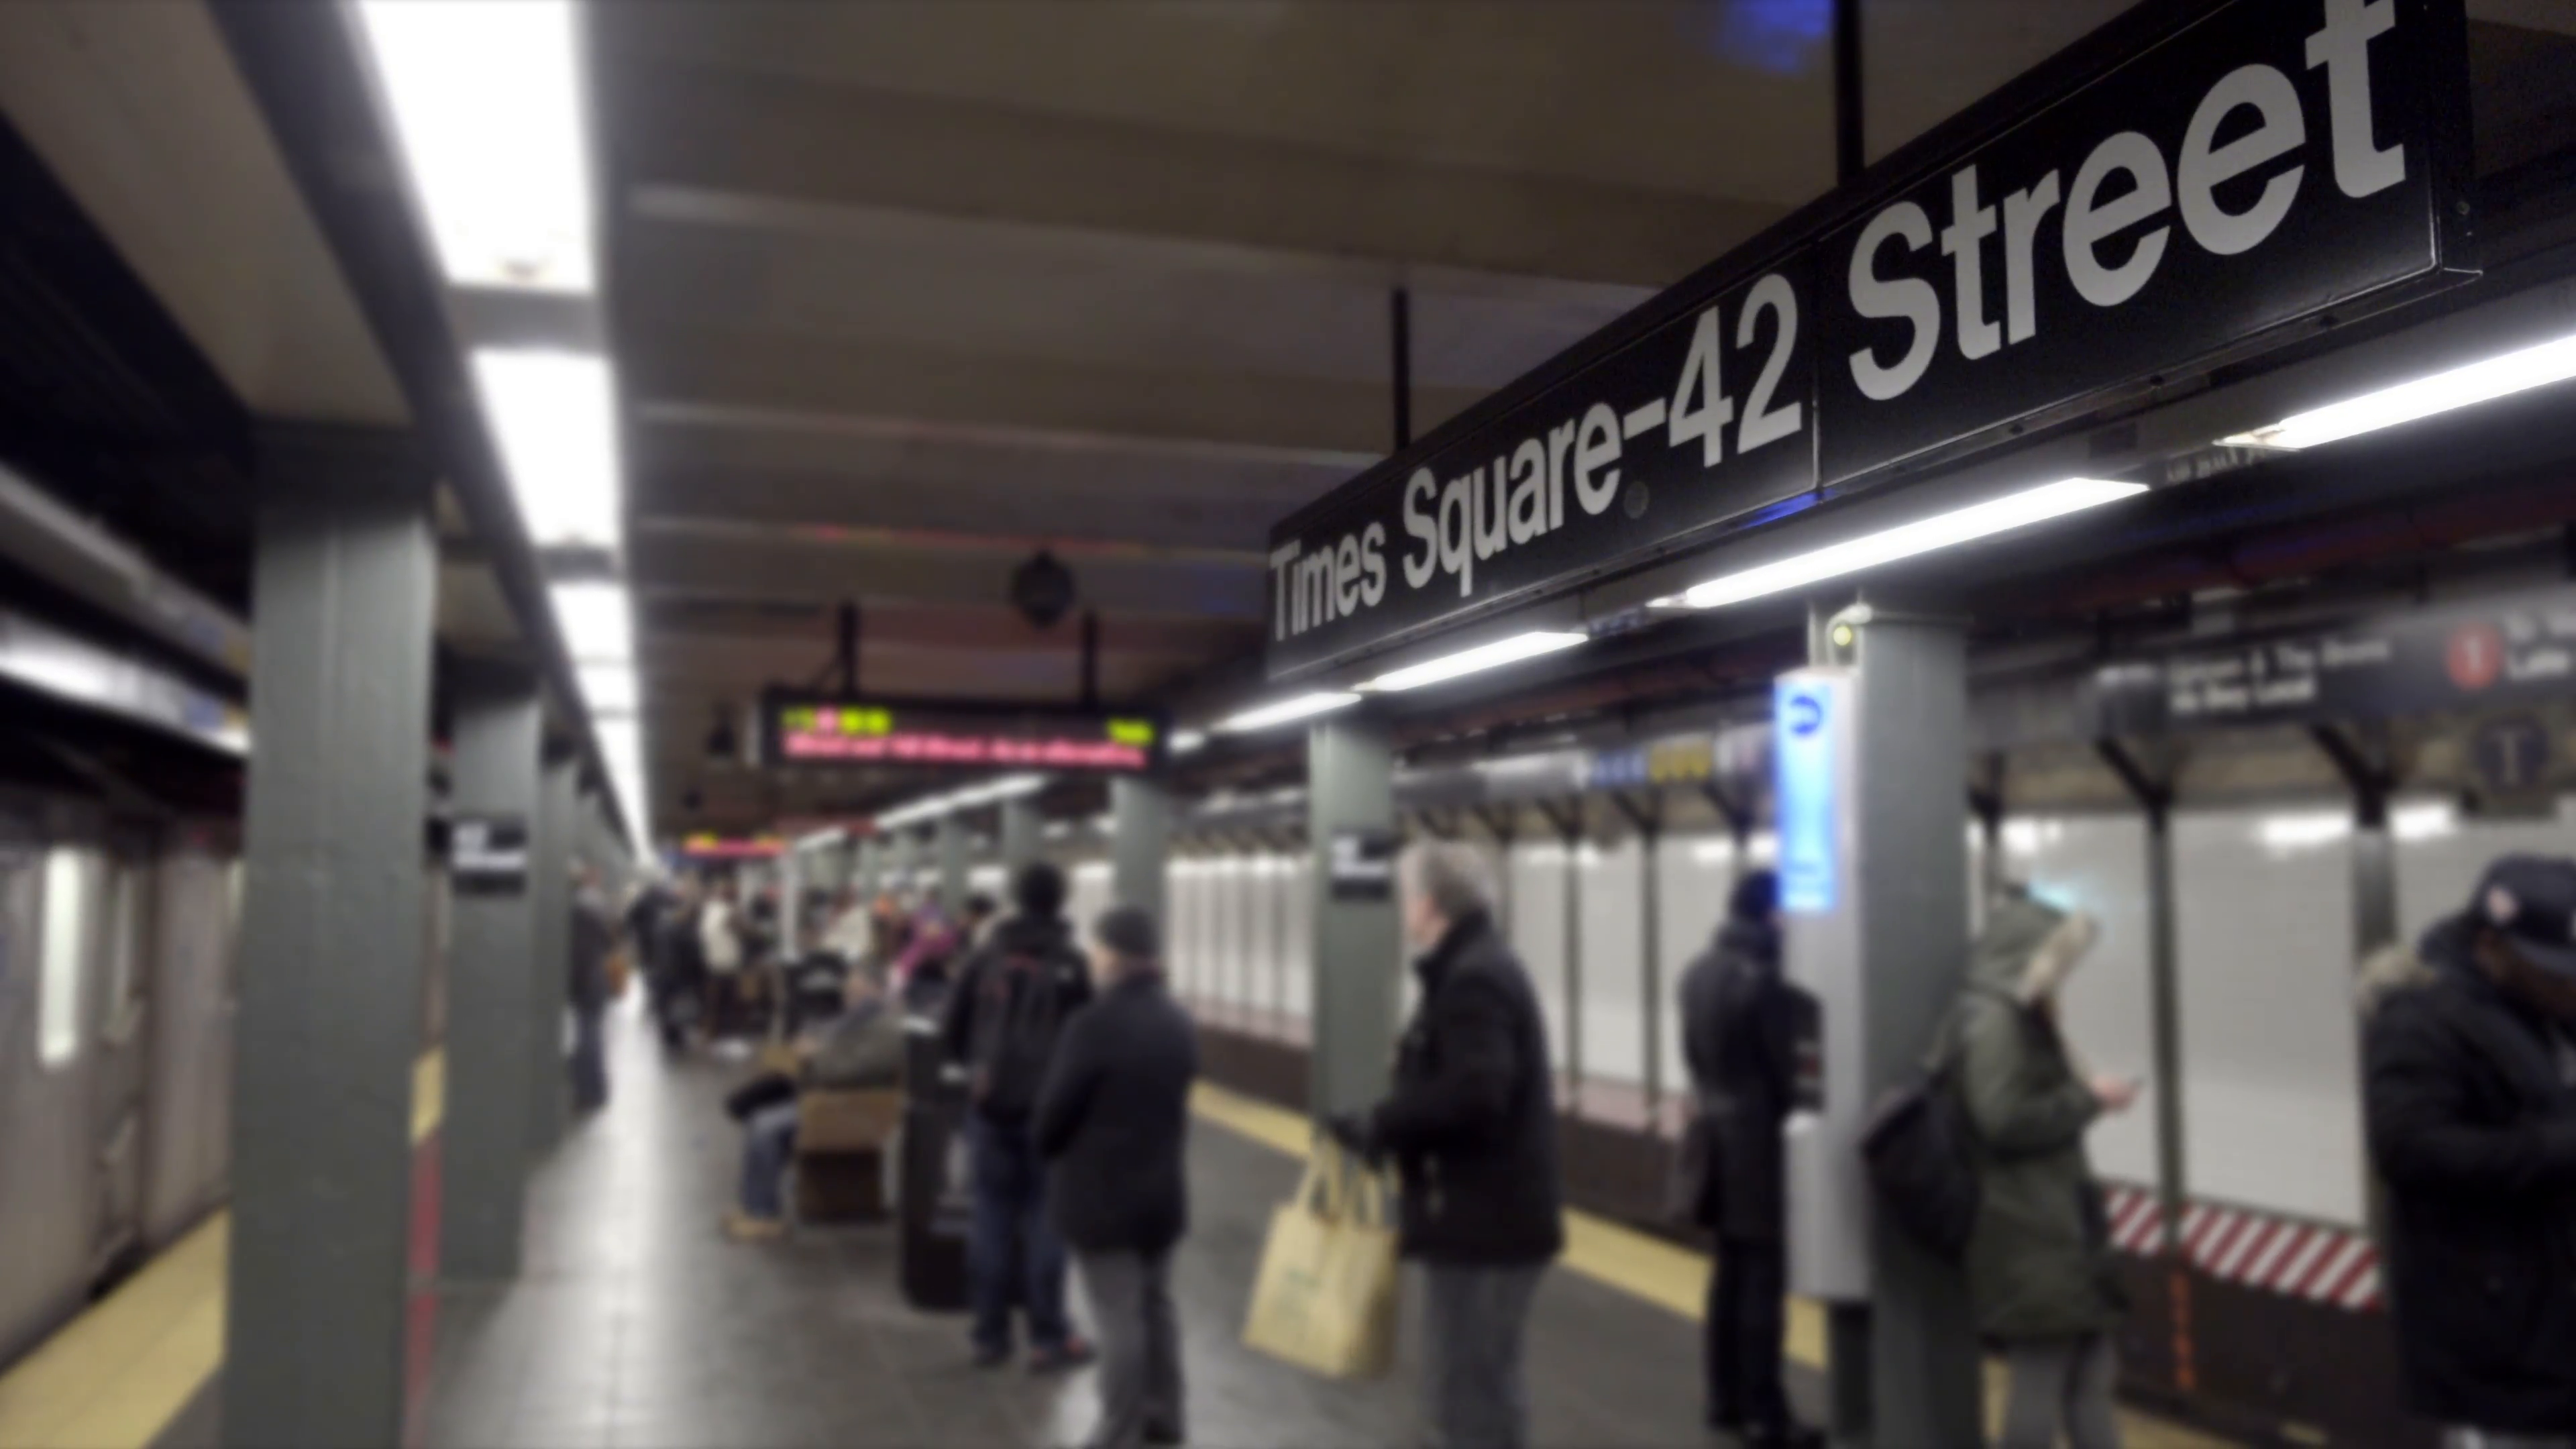 subway train leaving platform with Times Square 42nd Street station ...